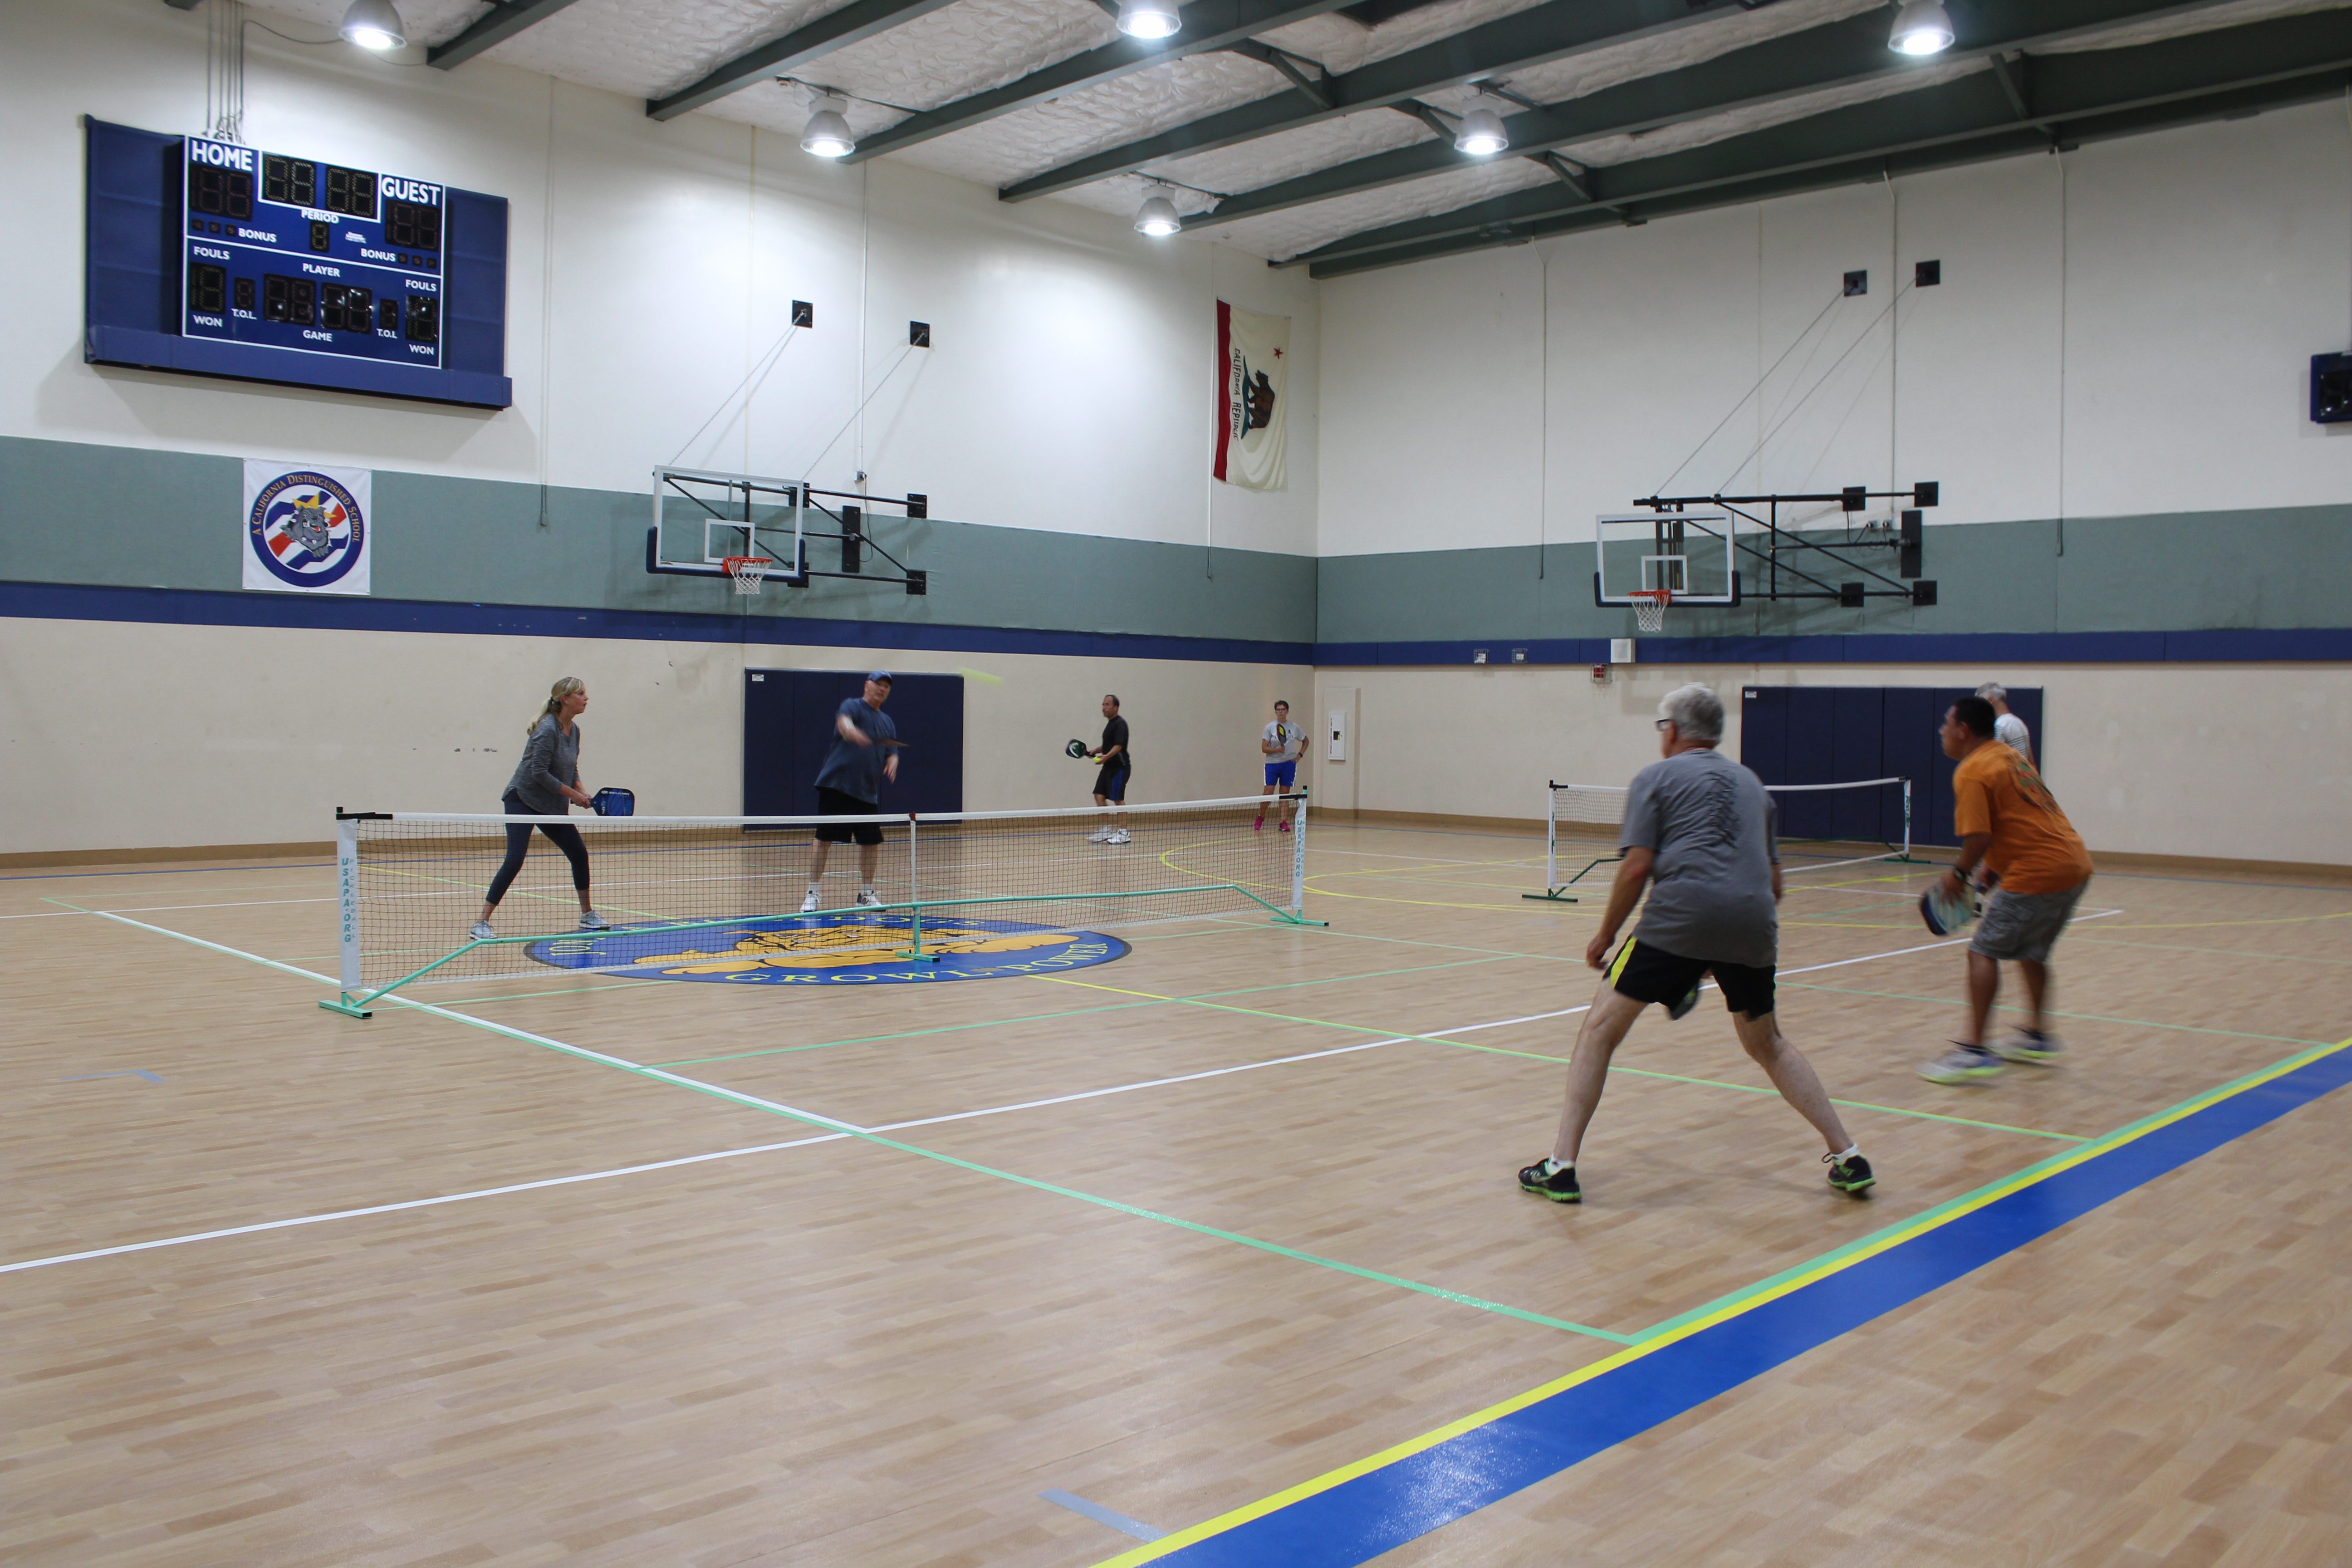 Local pickleball club hopes to build public courts